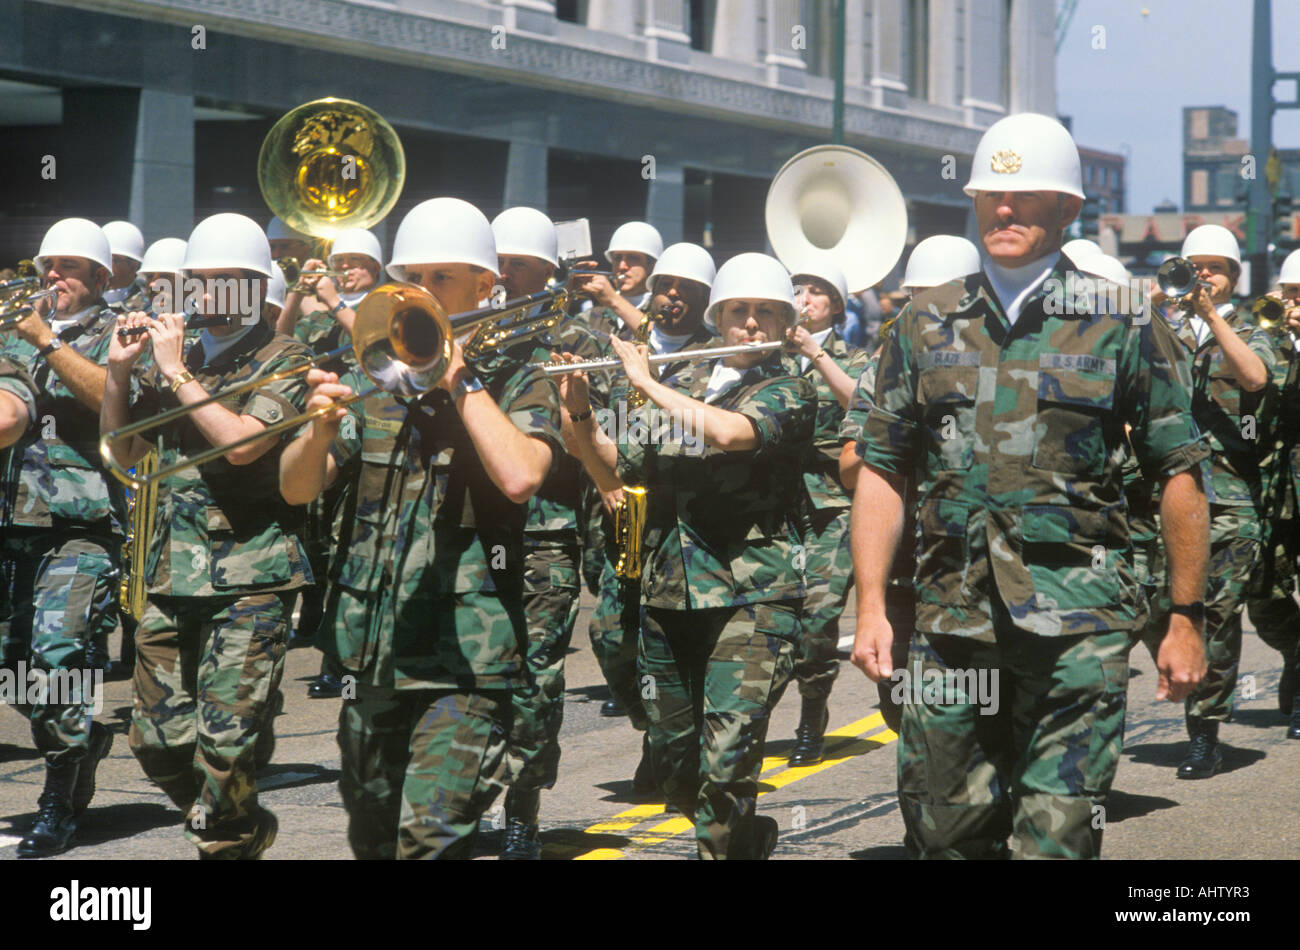 Military Band Marching in the United States Army Parade Chicago Illinois Stock Photo